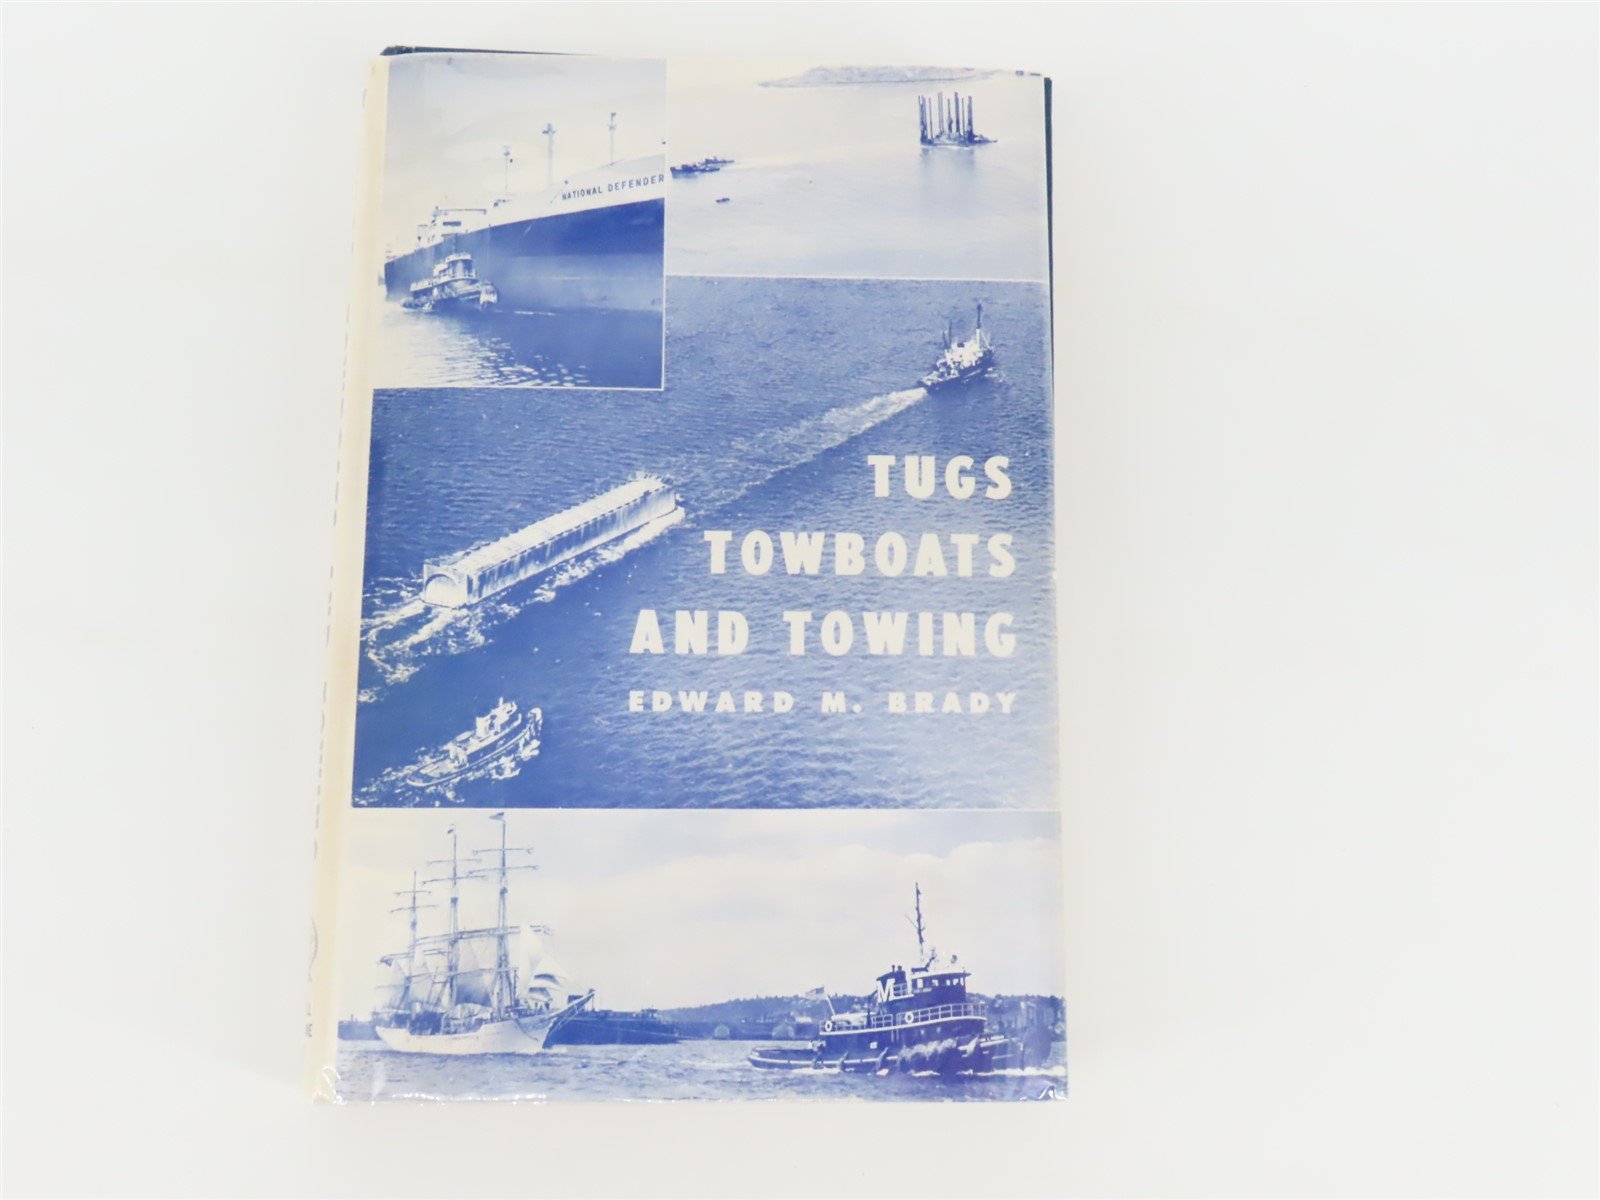 Tugs Towboats And Towing by Edward M. Brady ©1967 HC Book